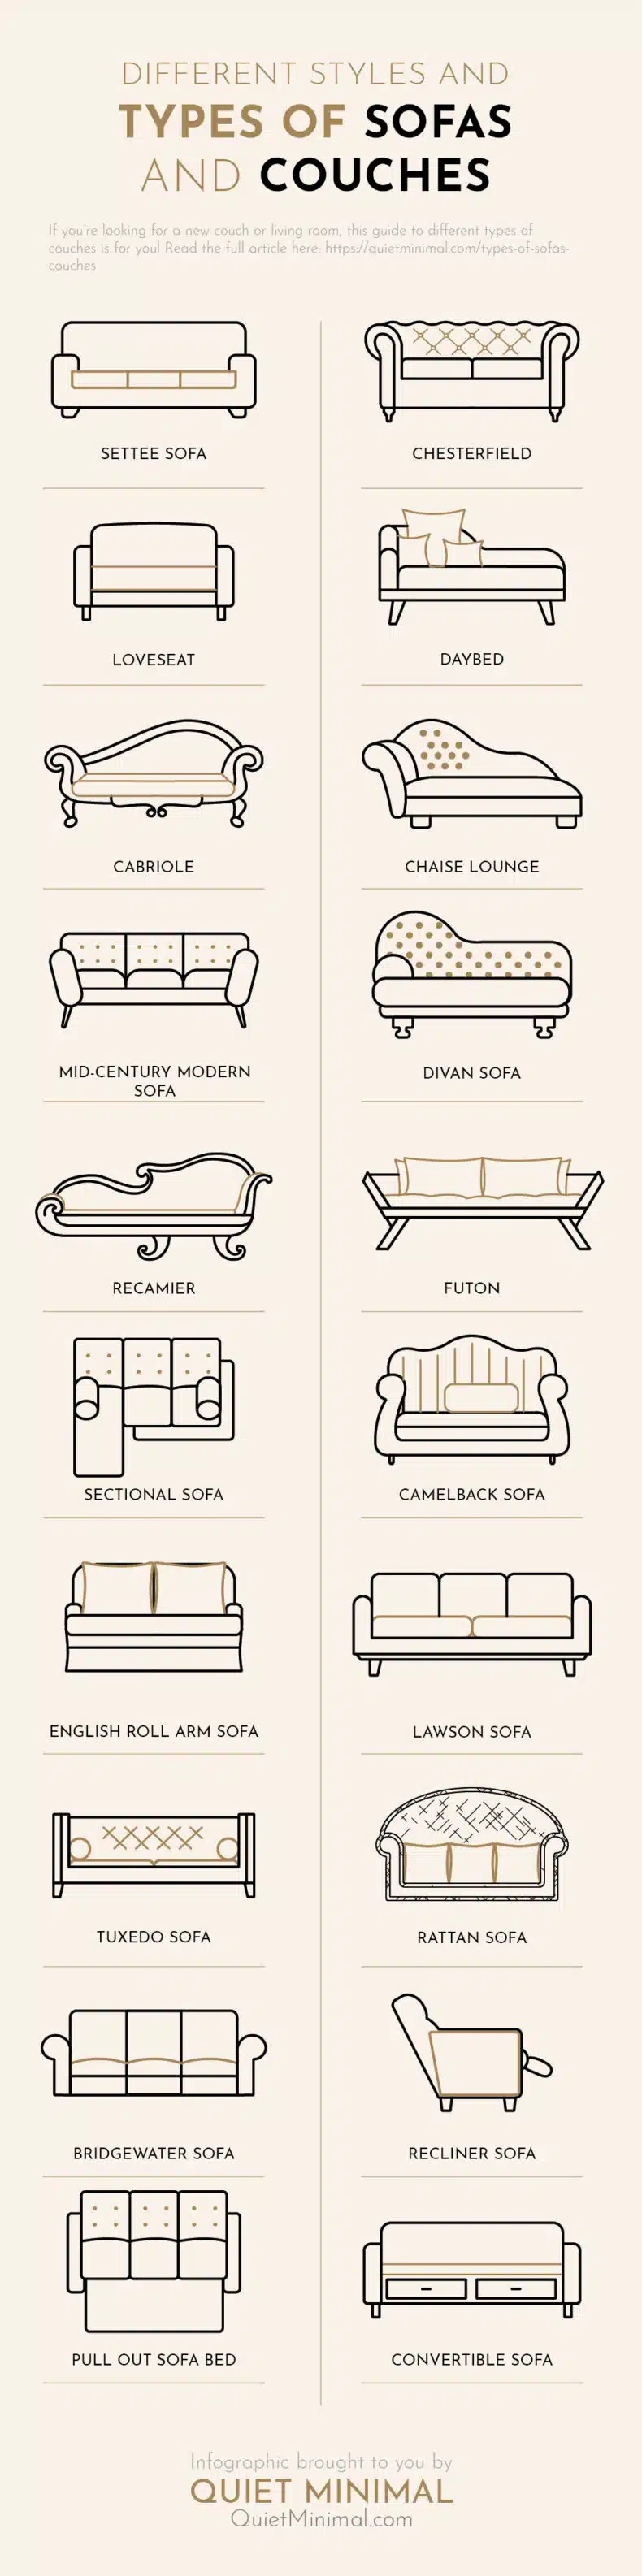 types of sofas and couches